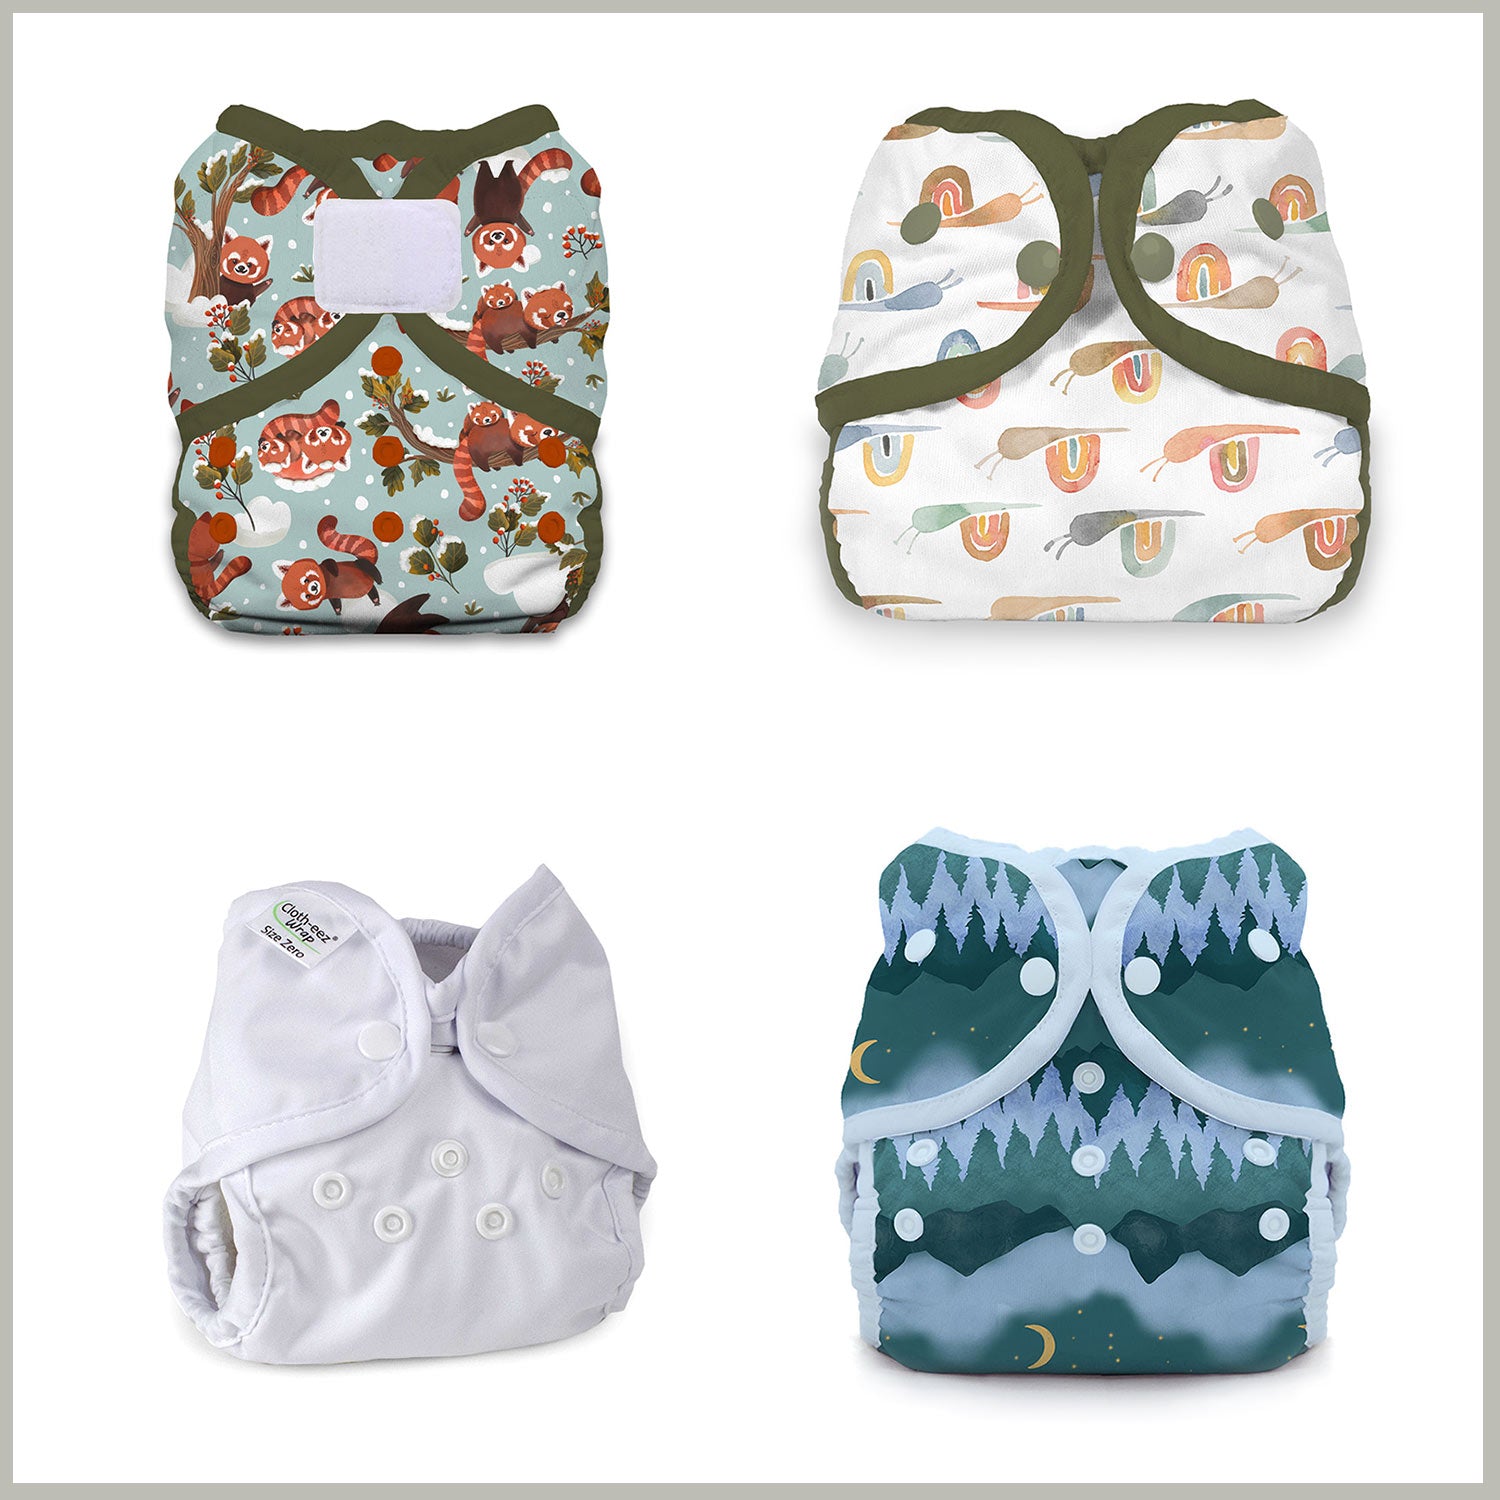 Diaper Covers For Girls Plastic Underwear Covers For Potty